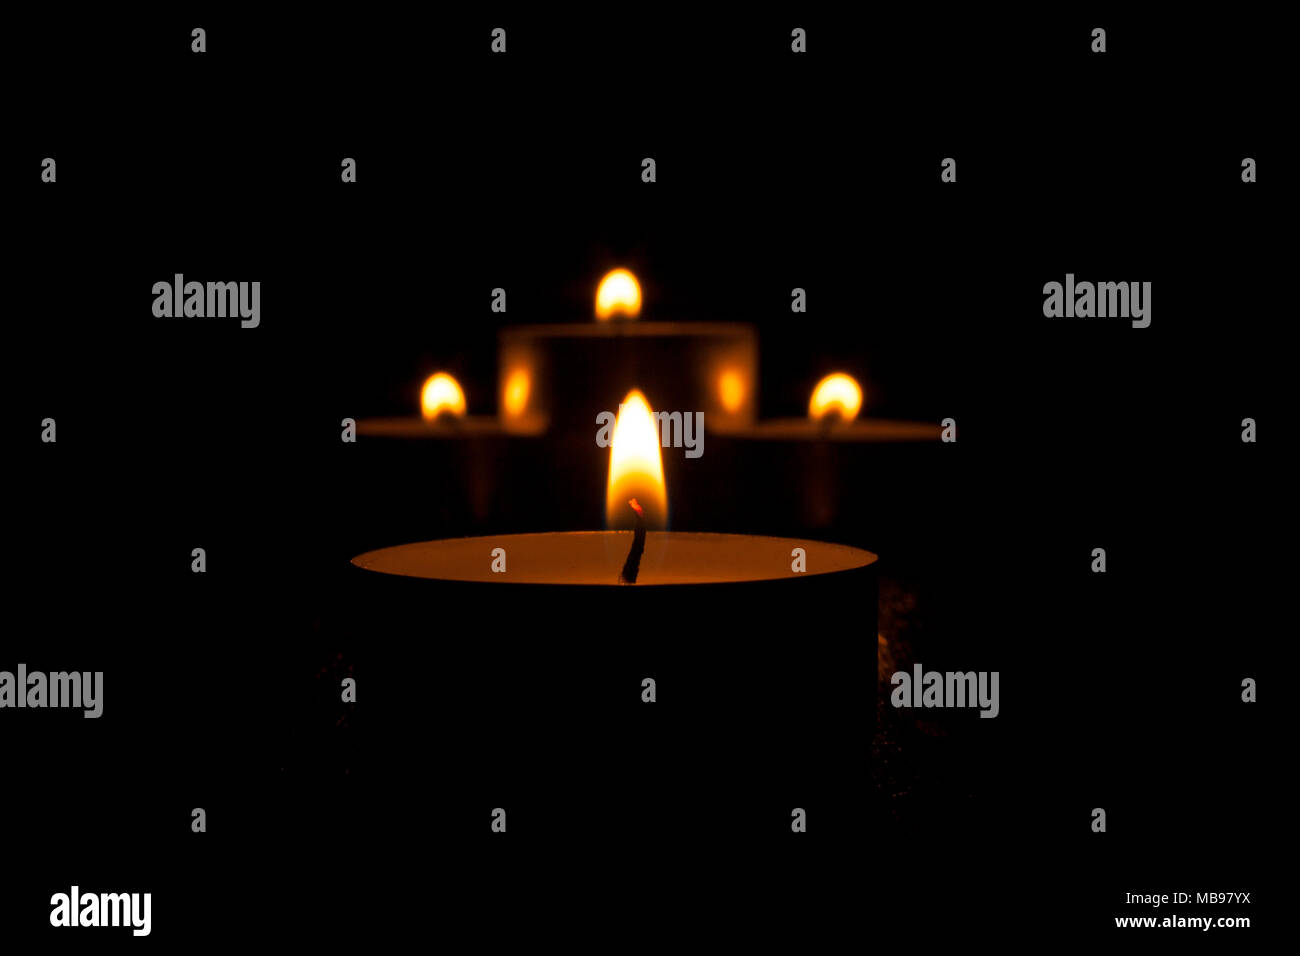 Candle tealights burning on a black background Stock Photo